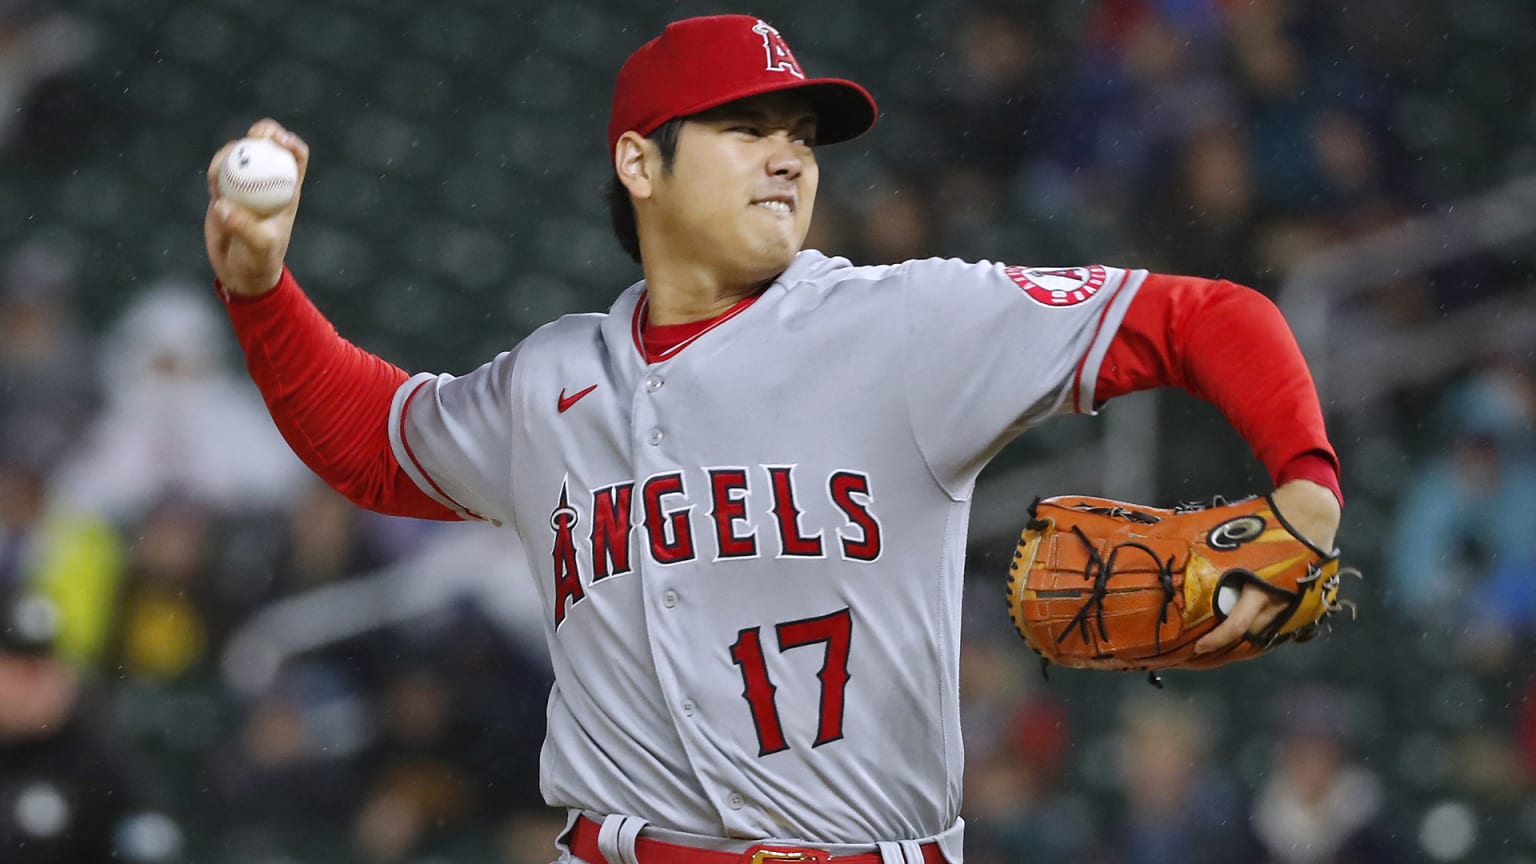 Shohei Ohtani shown in mid-pitch